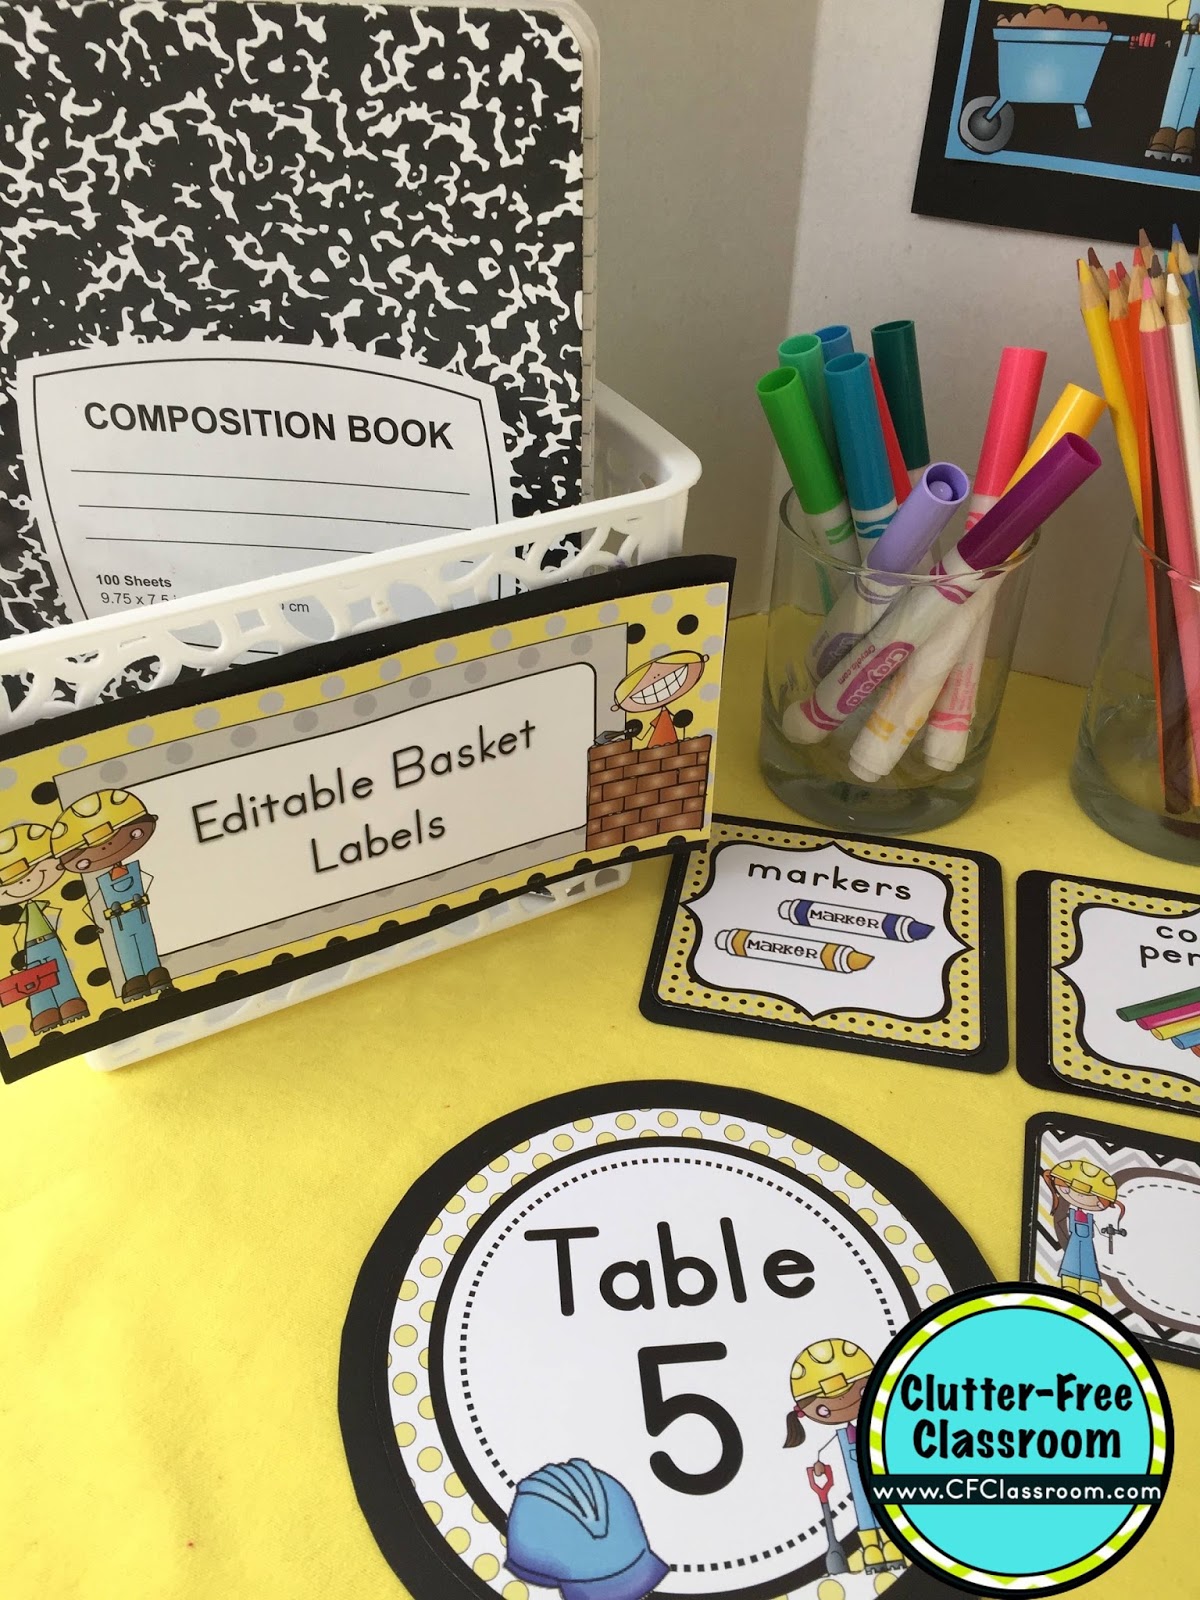 Are you planning a construction themed classroom or thematic unit? This blog post provides great decoration tips and ideas for the best a construction theme yet! It has photos, ideas, supplies & printable classroom decor to will make set up easy and affordable. You can create a construction theme on a budget!